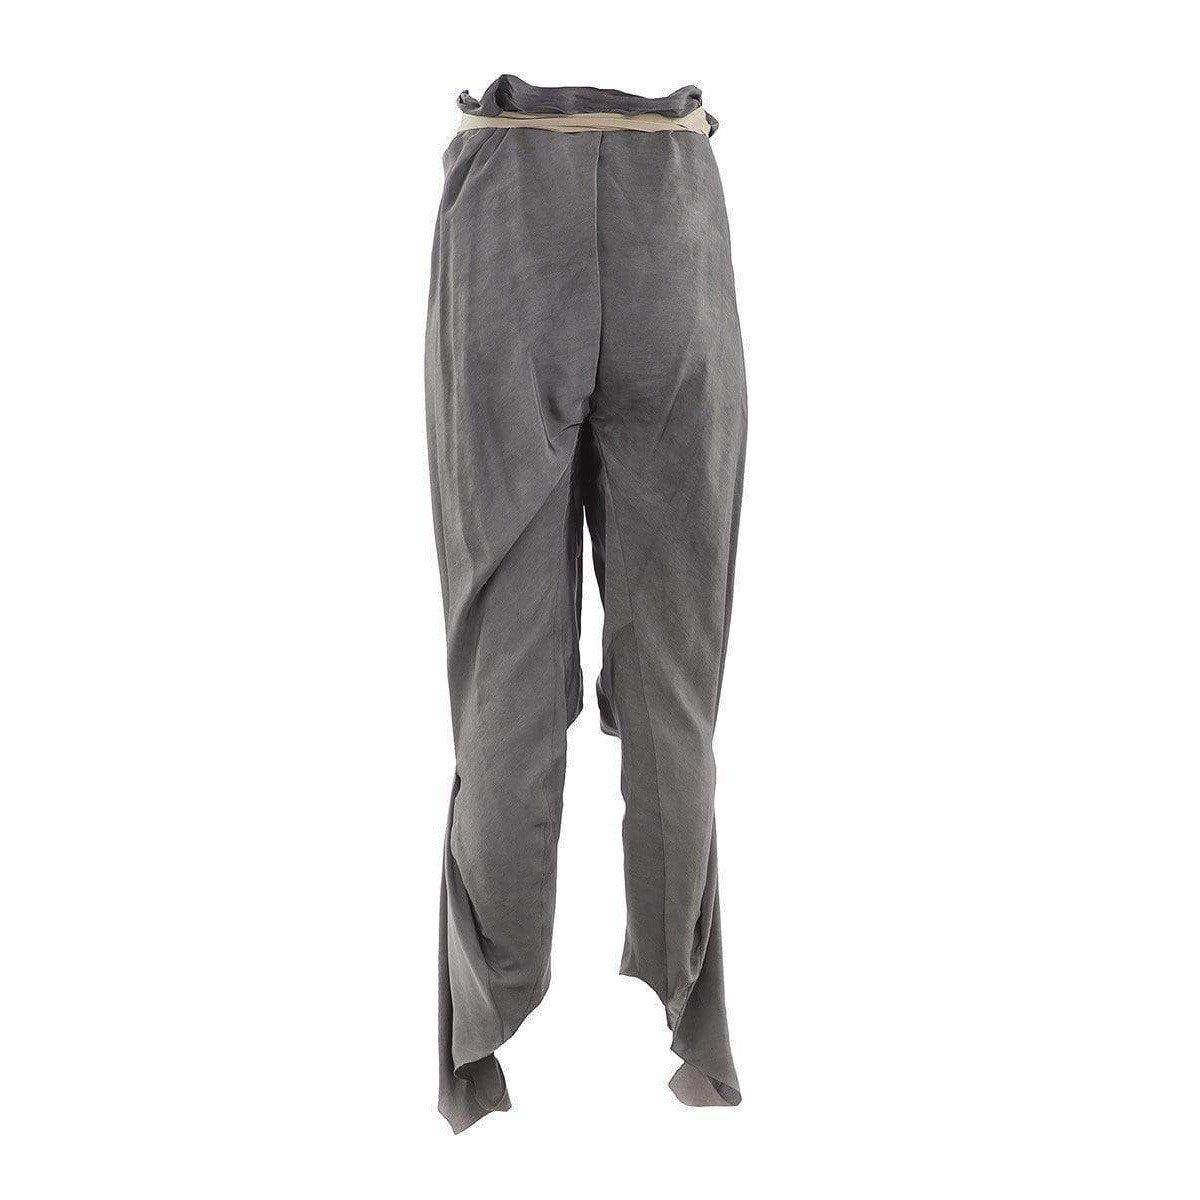 These grey acid-washed silk harem pants from Thimister are easy and flattering, wrapping you like a gift with the beige grosgrain sash and button detail at ankle.